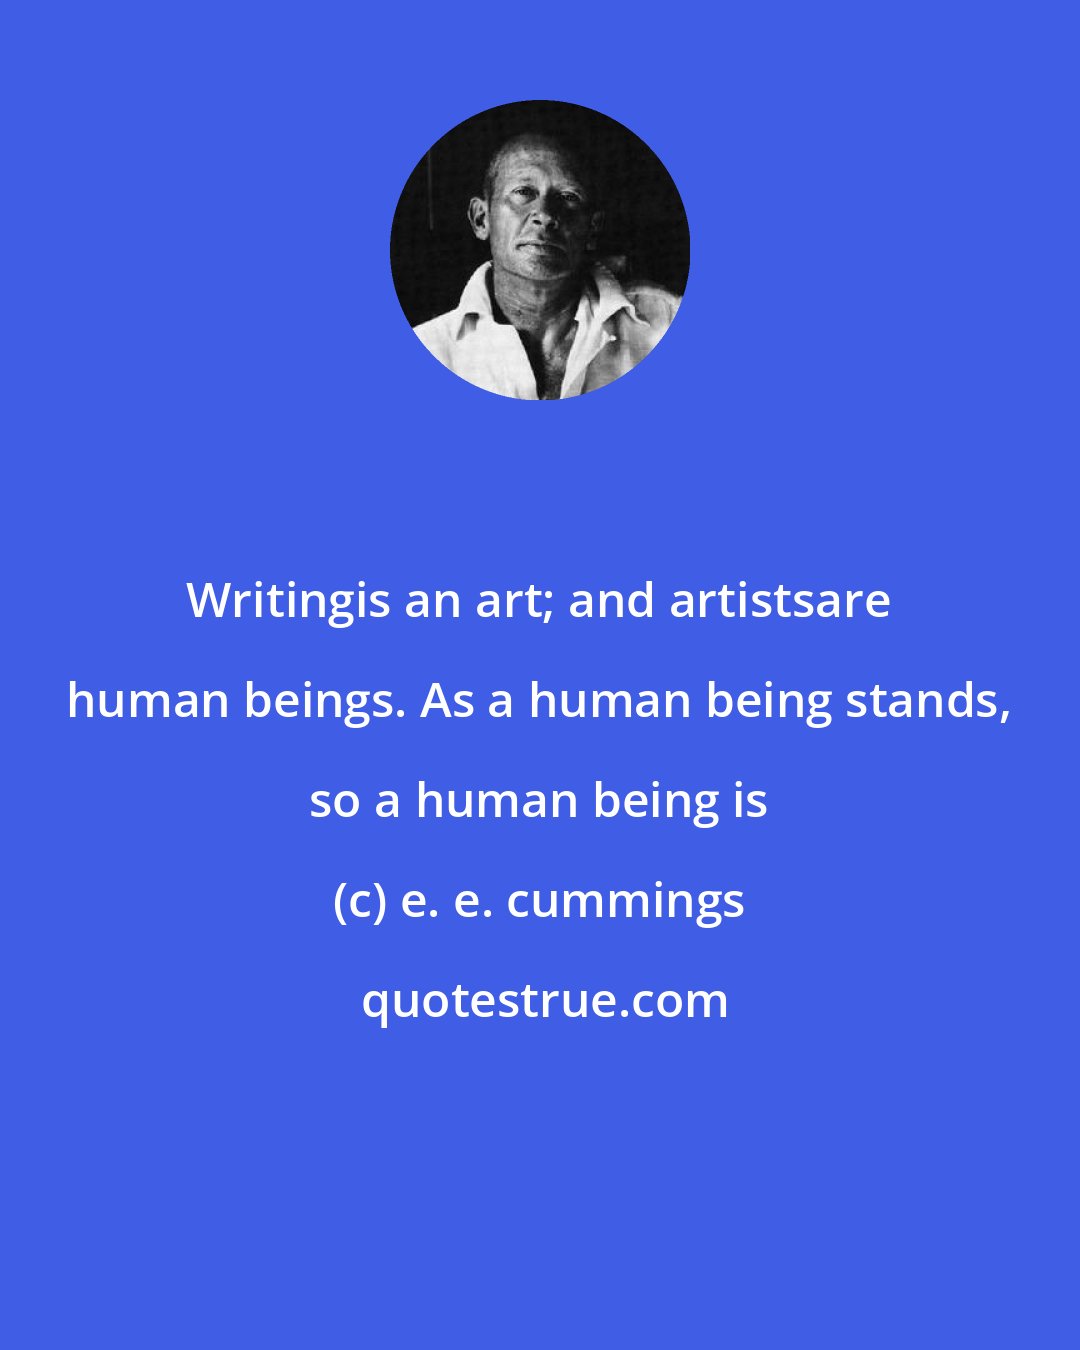 e. e. cummings: Writingis an art; and artistsare human beings. As a human being stands, so a human being is